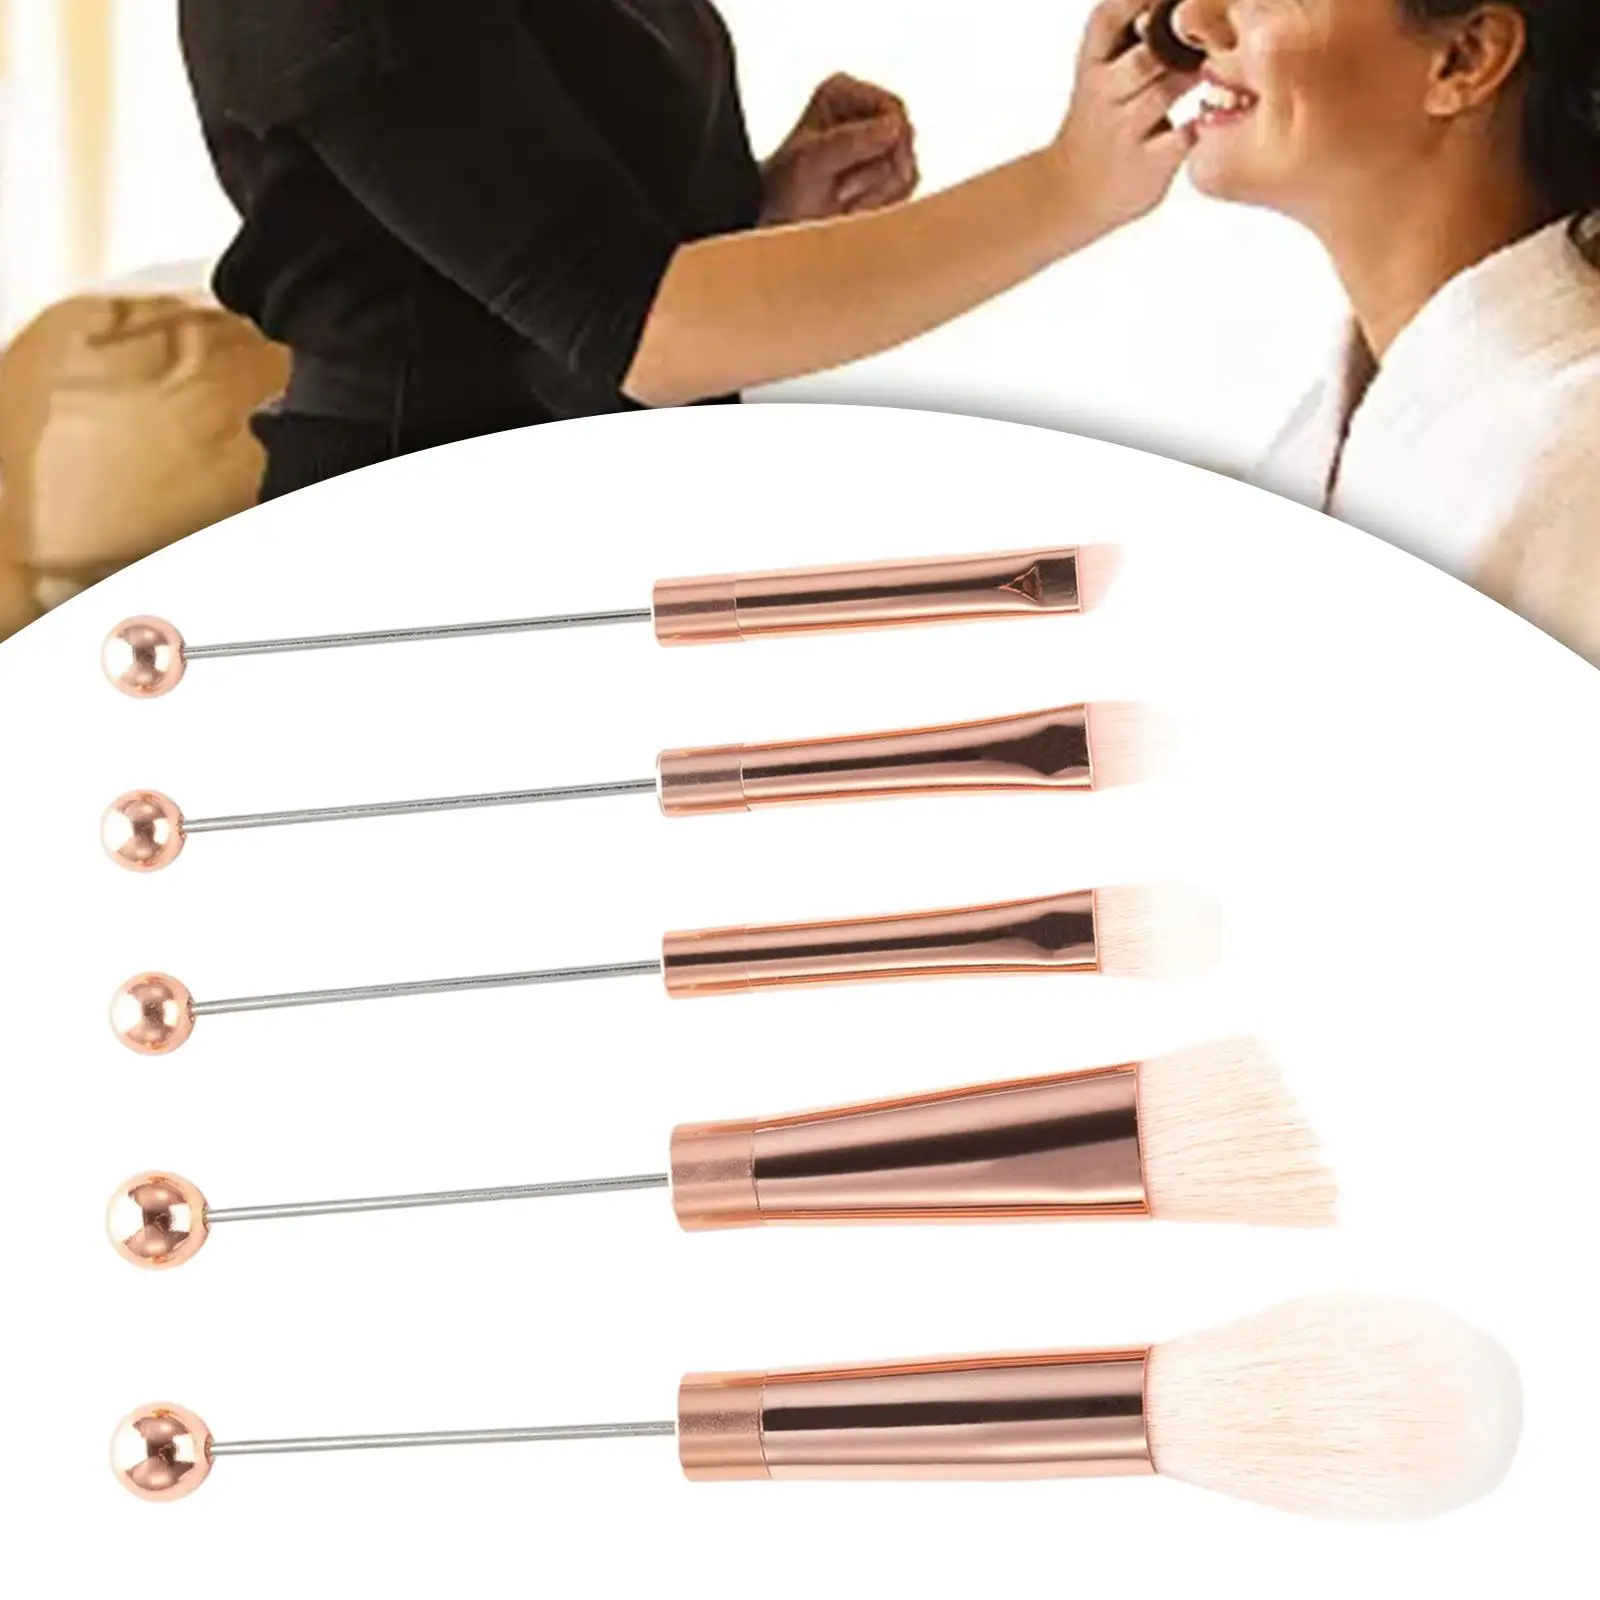 5x Eye Makeup Brush Set DIY Angled Brush Blending Face Powder Portable Cosmetic Brushes for Lady Girlfriend Bestie Sister Gifts